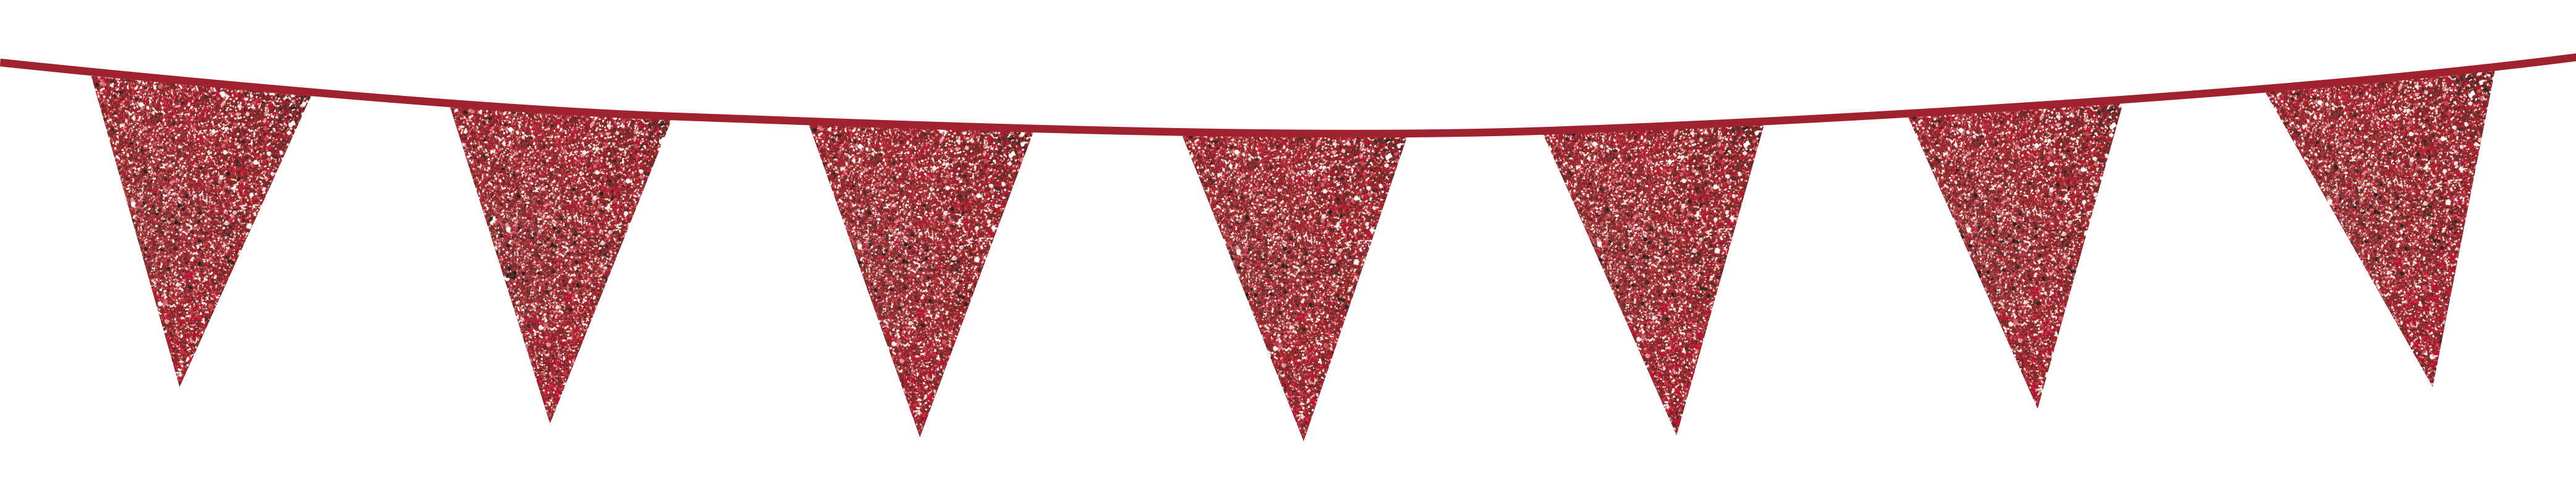 Bunting Glitter 6m. red - size flags 20x30cm per 6